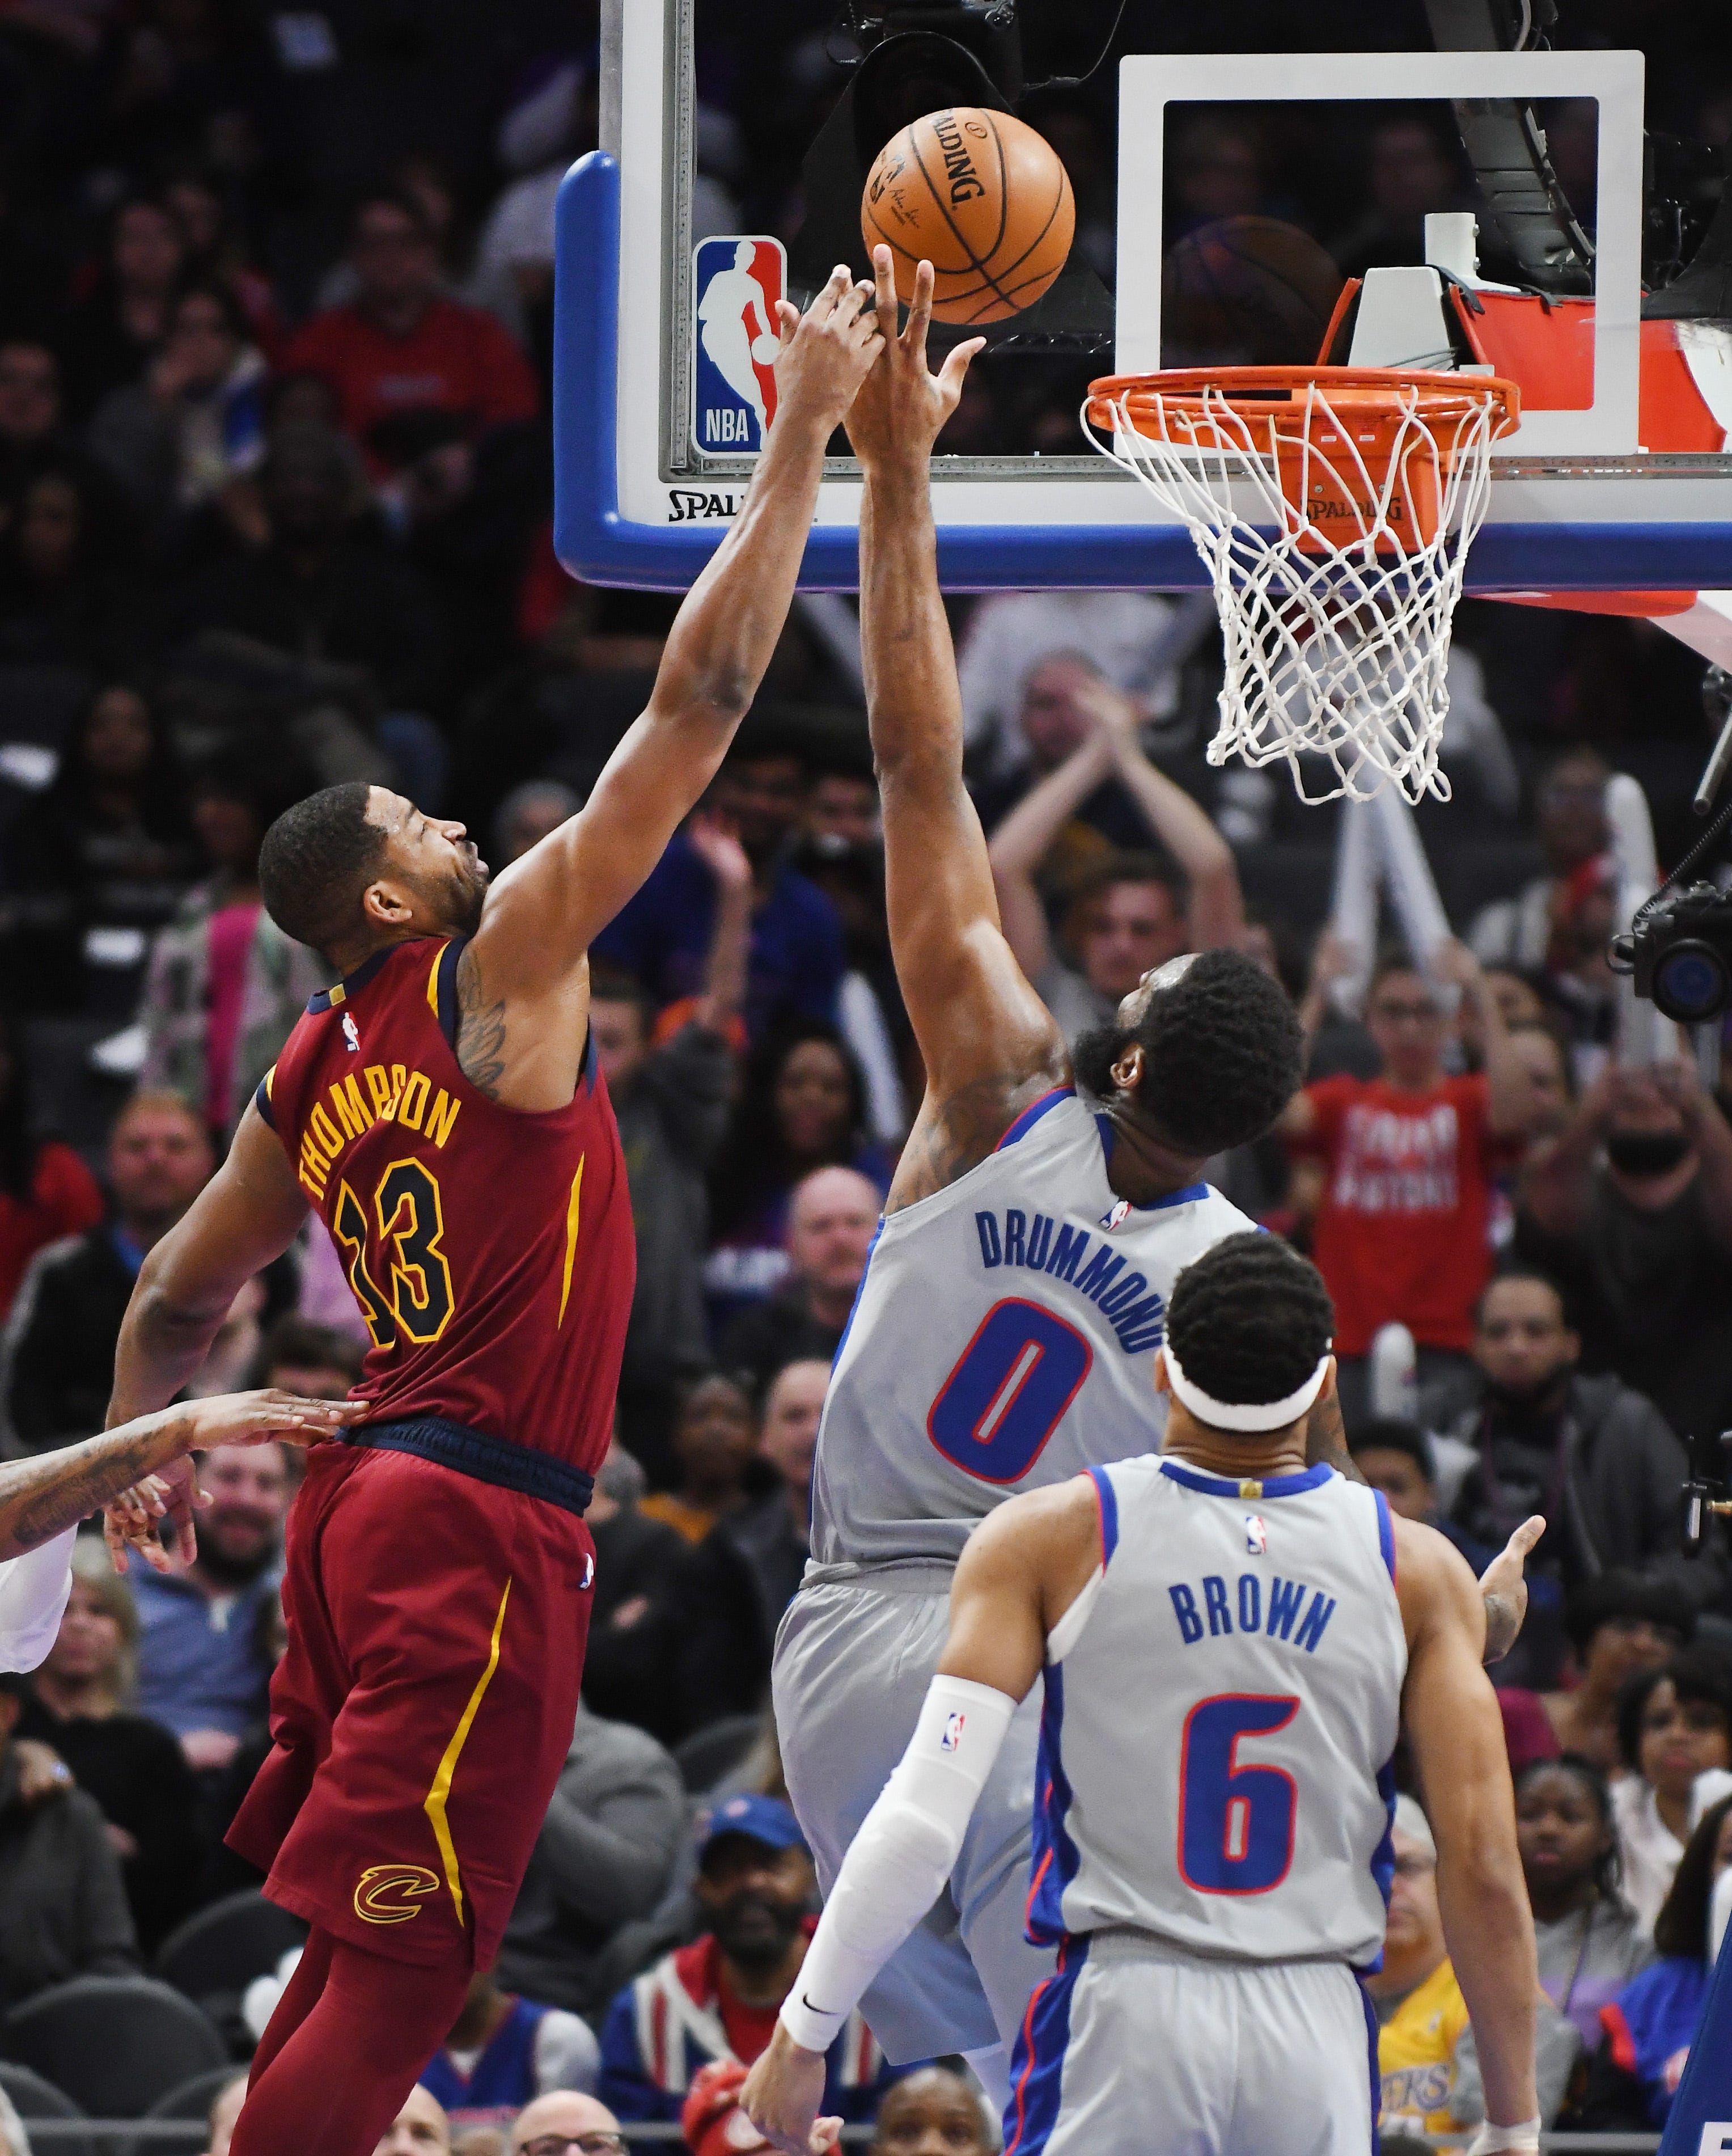 Cavaliers' Tristan Thompson puts up a shot and a bucket over Pistons' Andre Drummond in the second quarter.